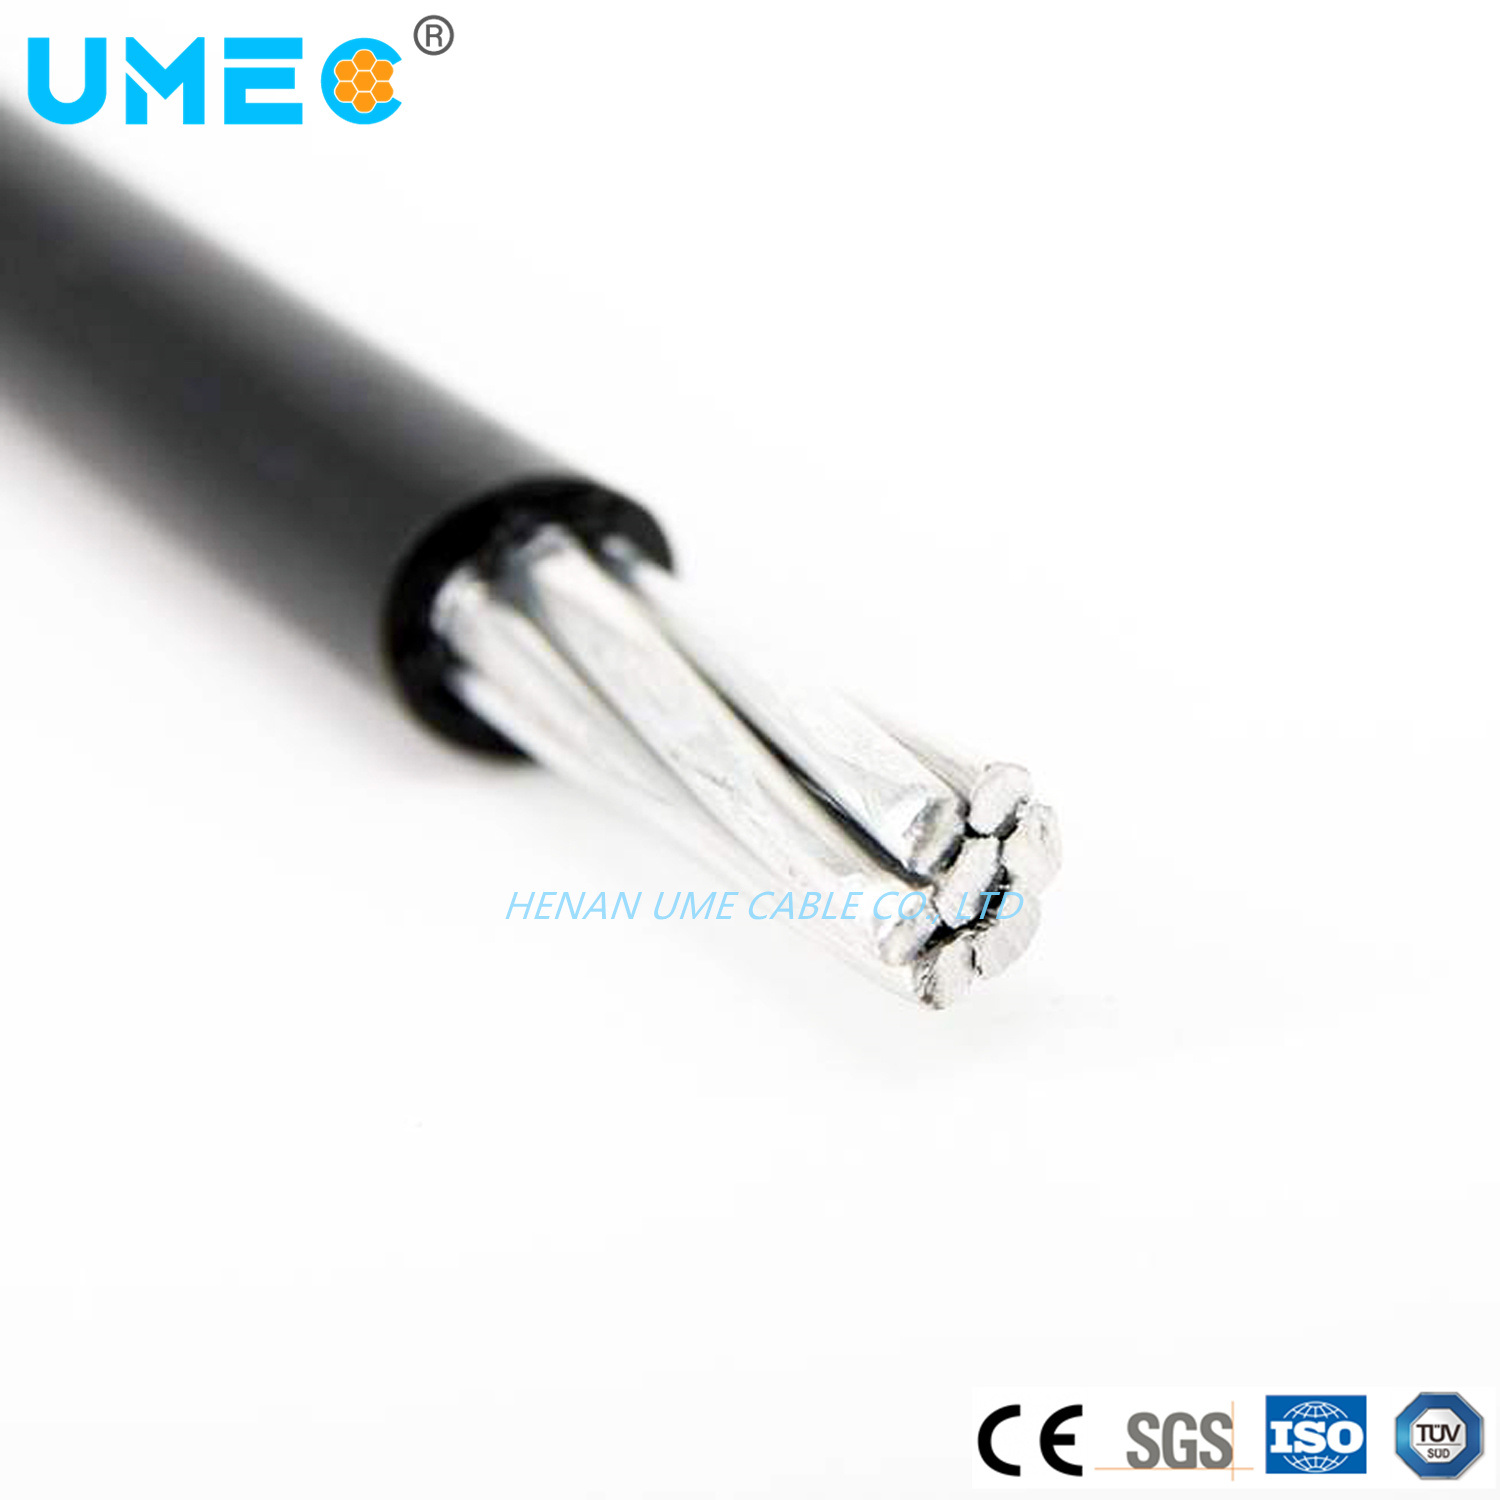 Service Drop Aerial Bundle Cable Overhead Line Electrical Power Cable 3X70mm2+54.6mm2+16mm2 ABC Cable